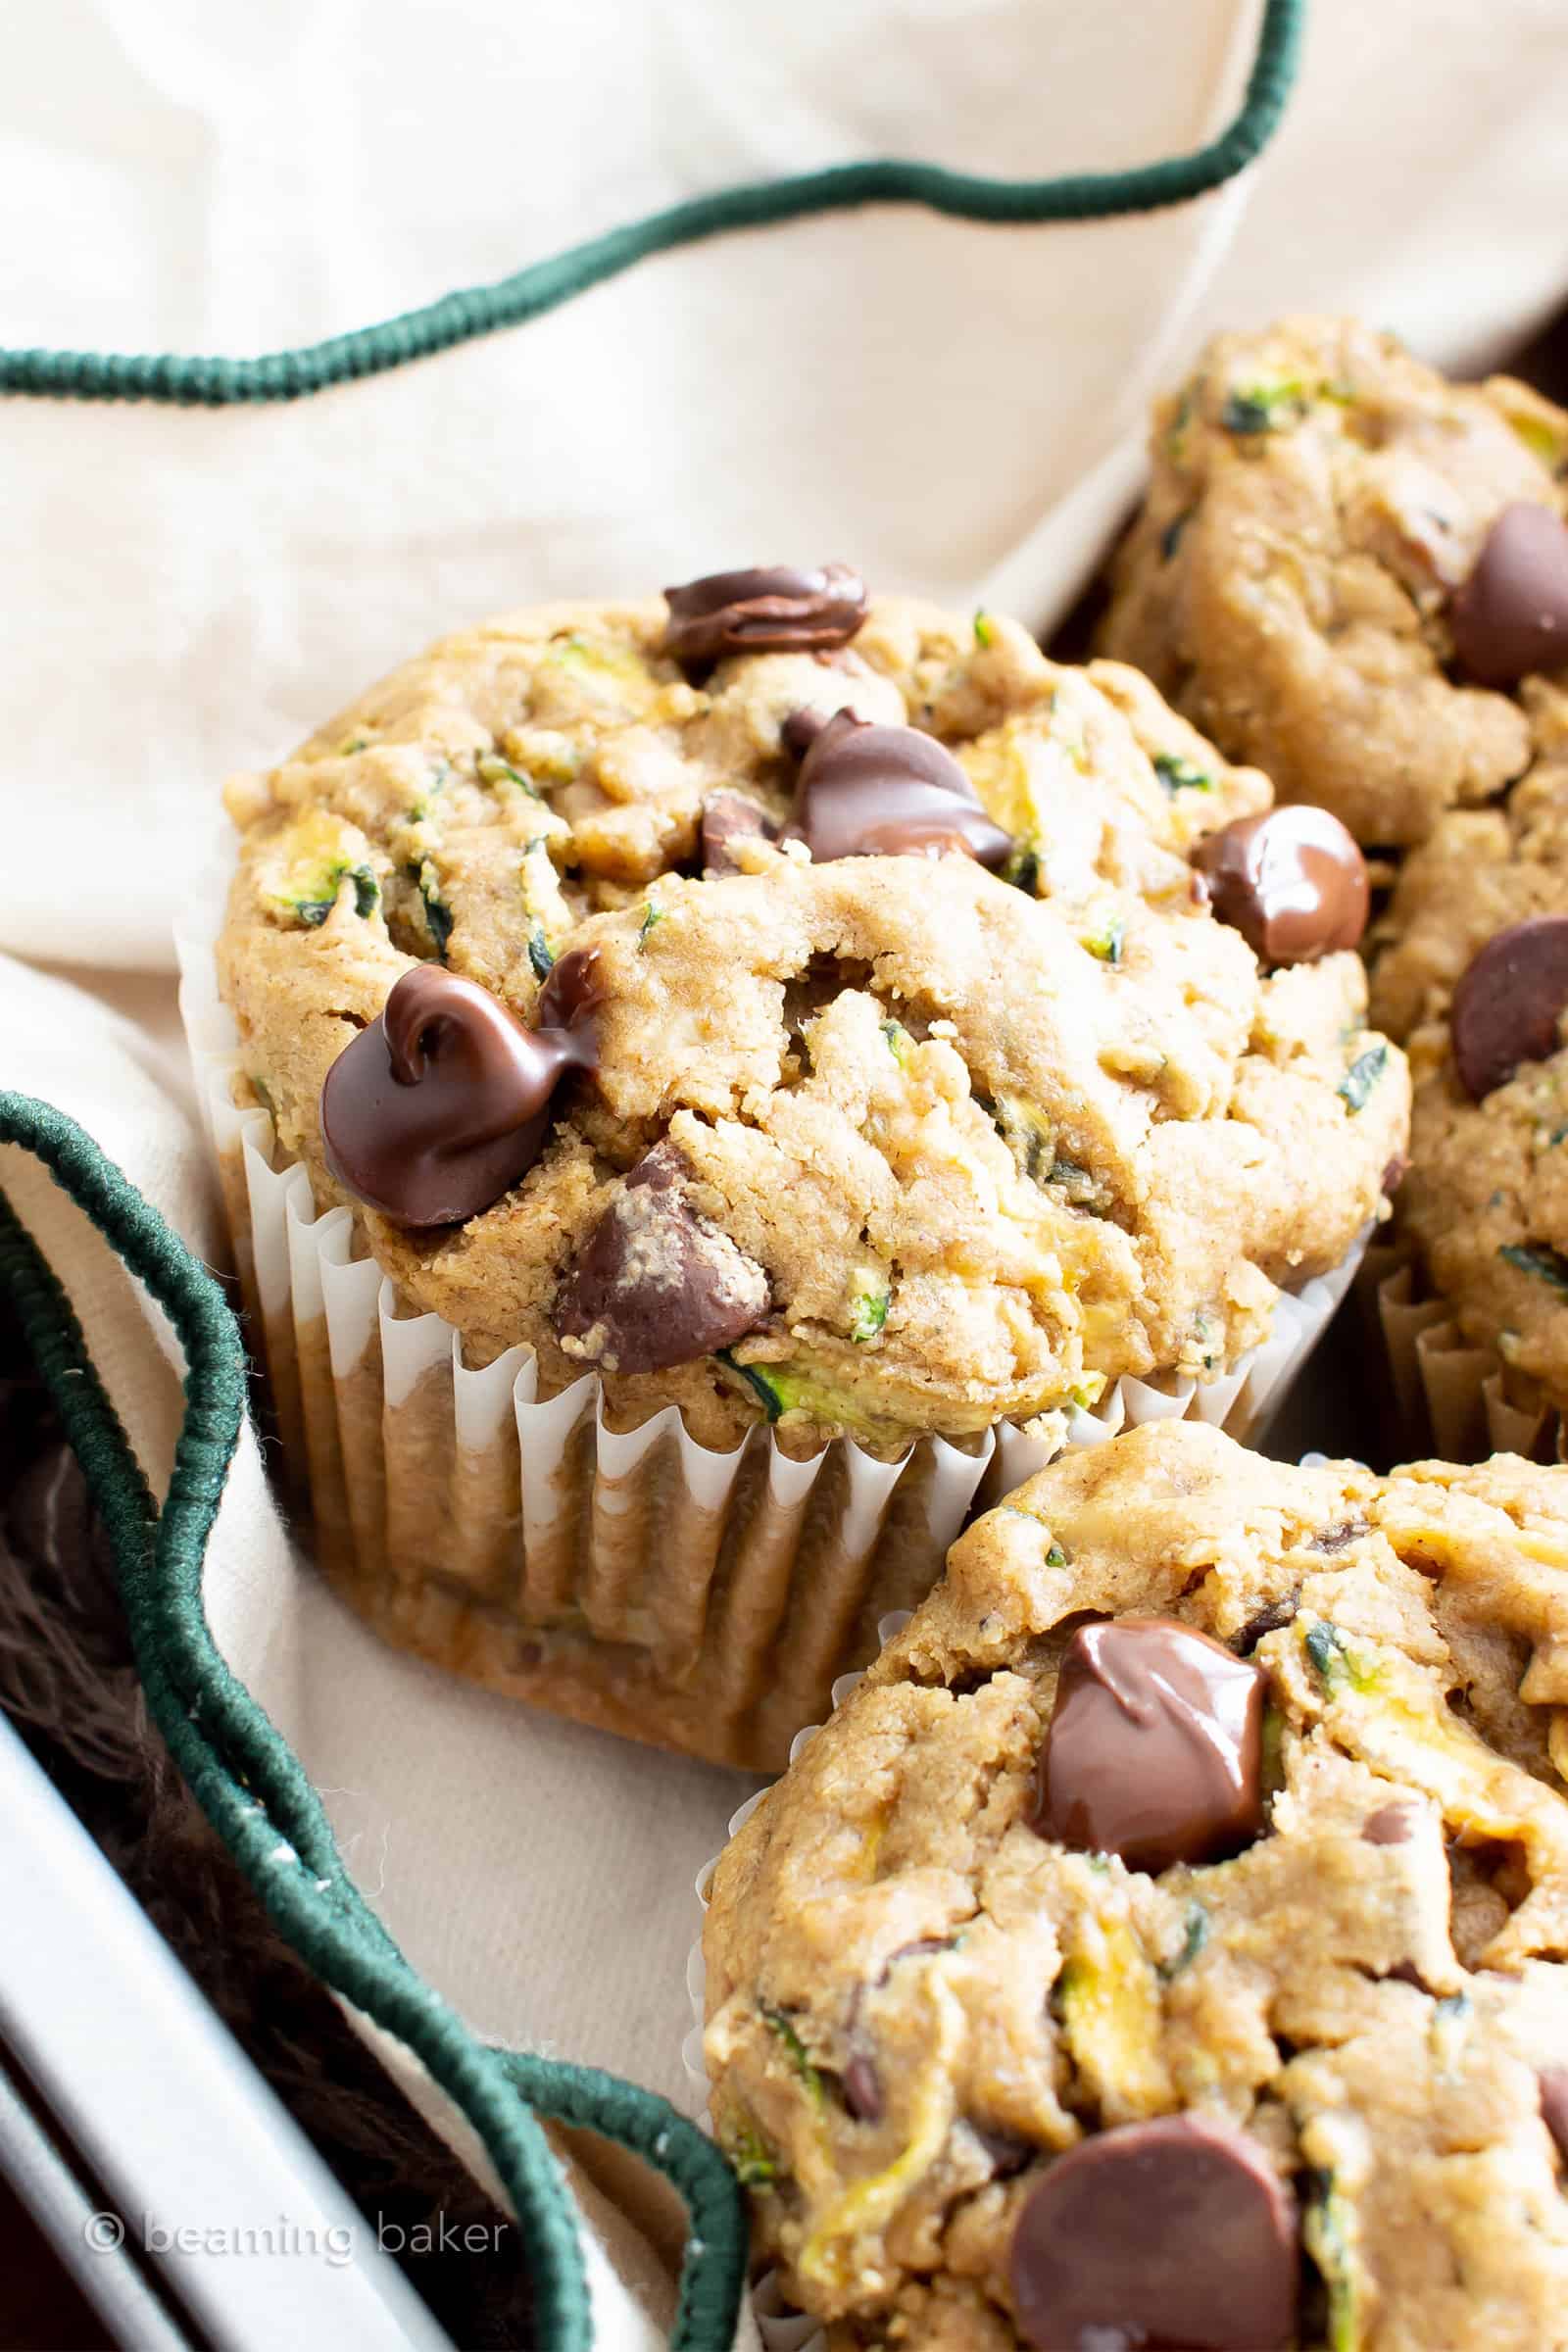 20+ Healthy Vegan Muffin Recipes (GF): A mouthwatering collection of the BEST homemade healthy muffins! Featuring healthy banana muffins, vegan blueberry muffins, and more easy muffin recipes! #Vegan #GlutenFree #DairyFree #Healthy #Muffins | Recipes on BeamingBaker.com